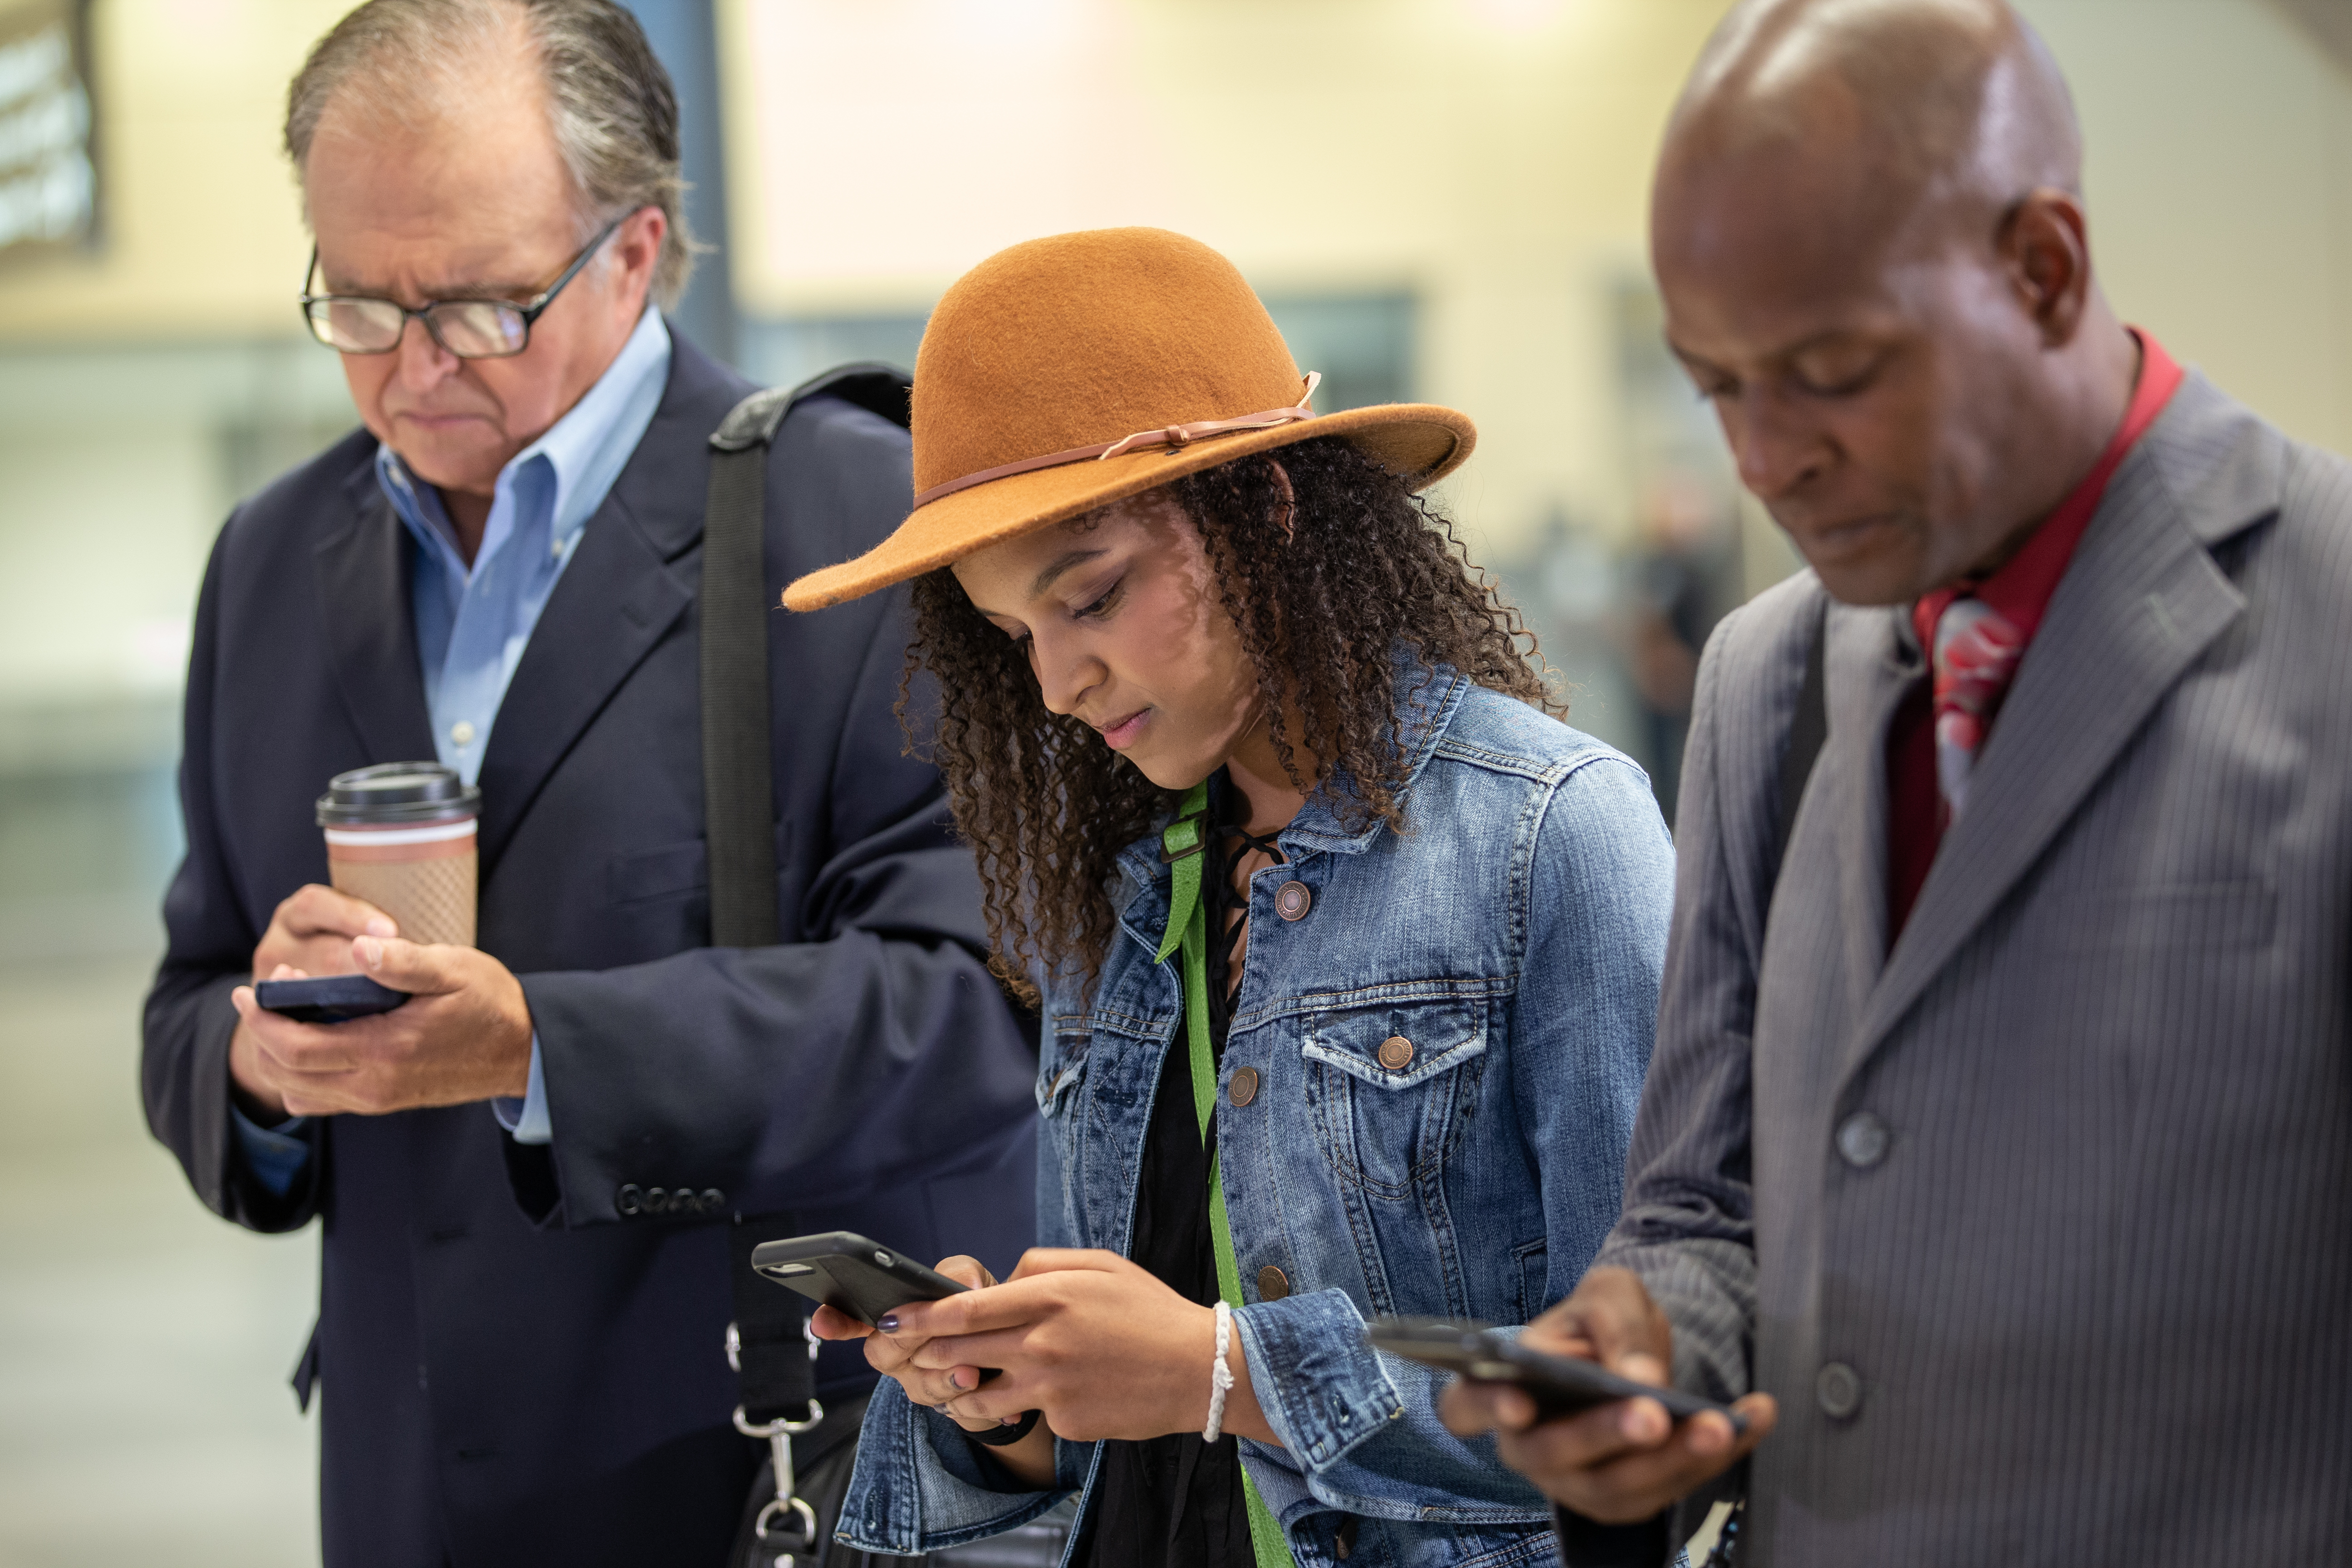 People stare at smartphones while waiting for luggage at airport baggage claim.